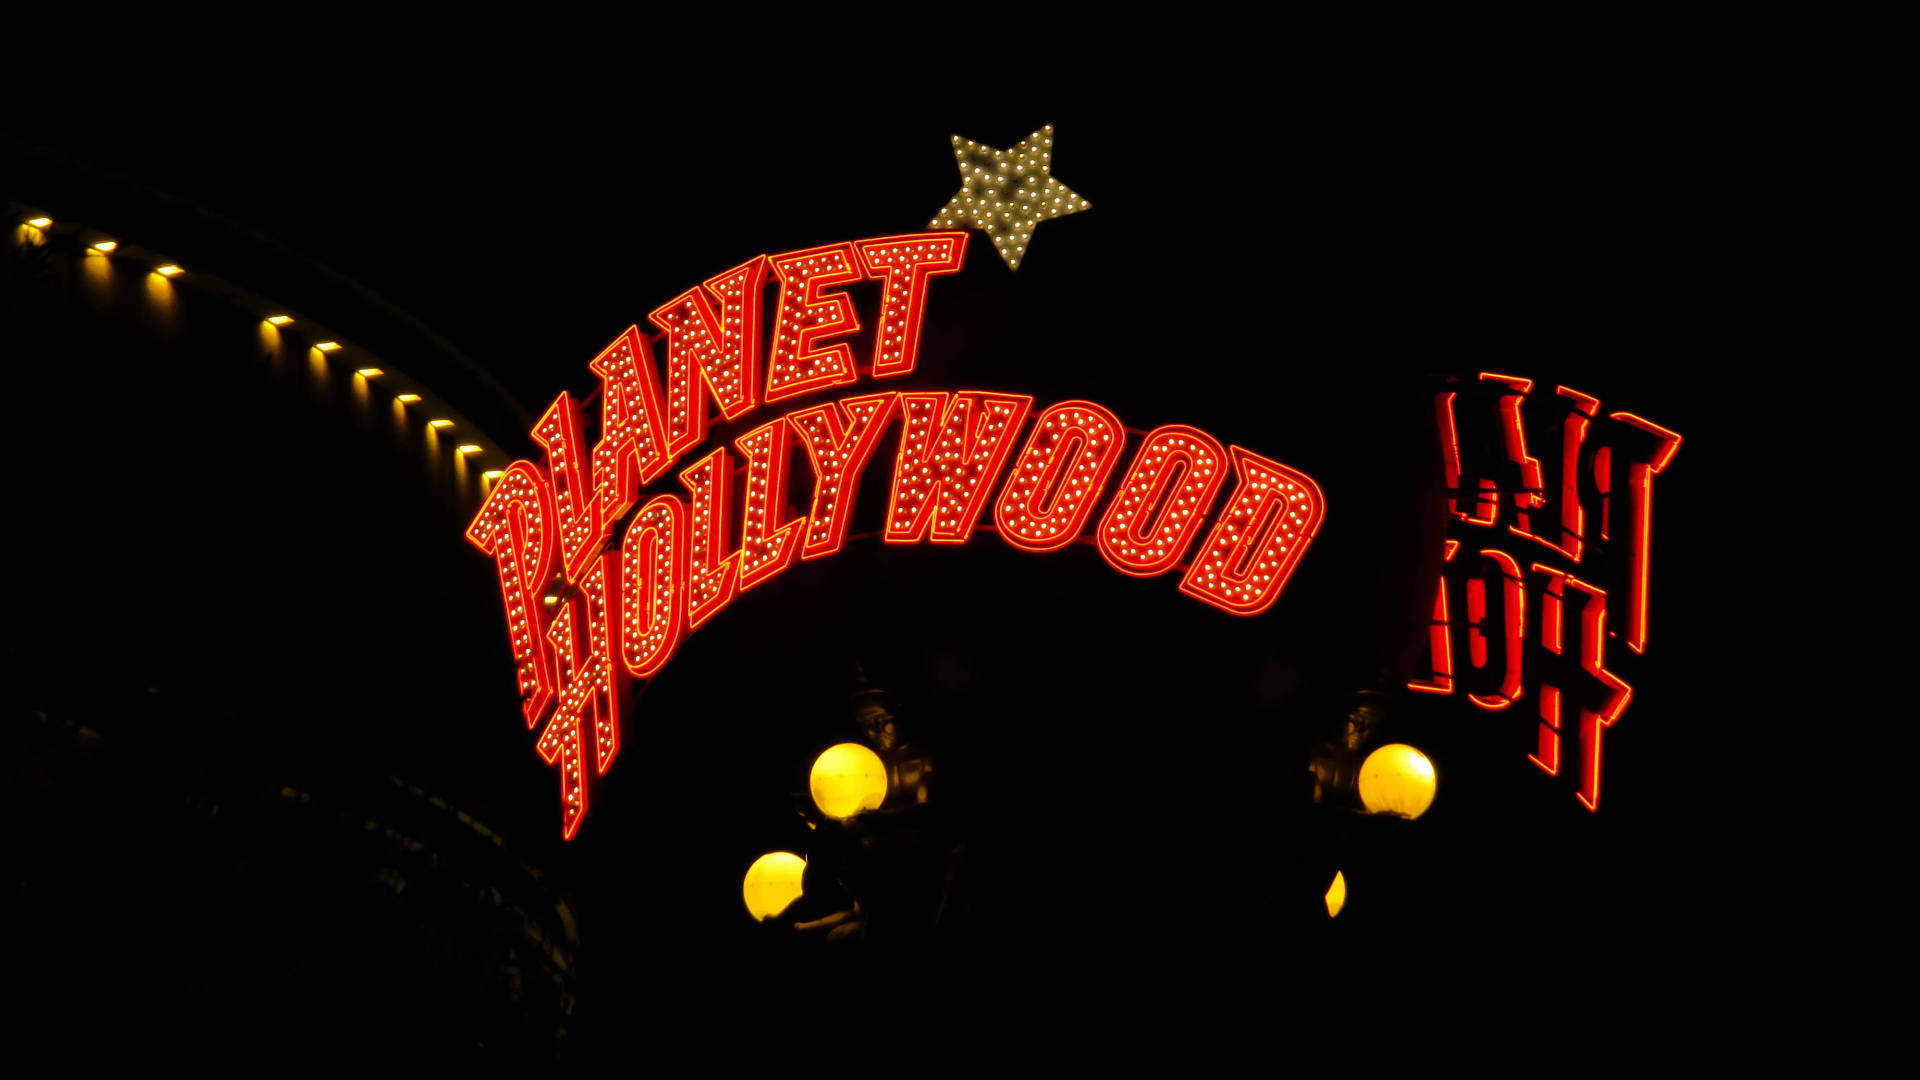 Planet Hollywood Signage Wallpaper